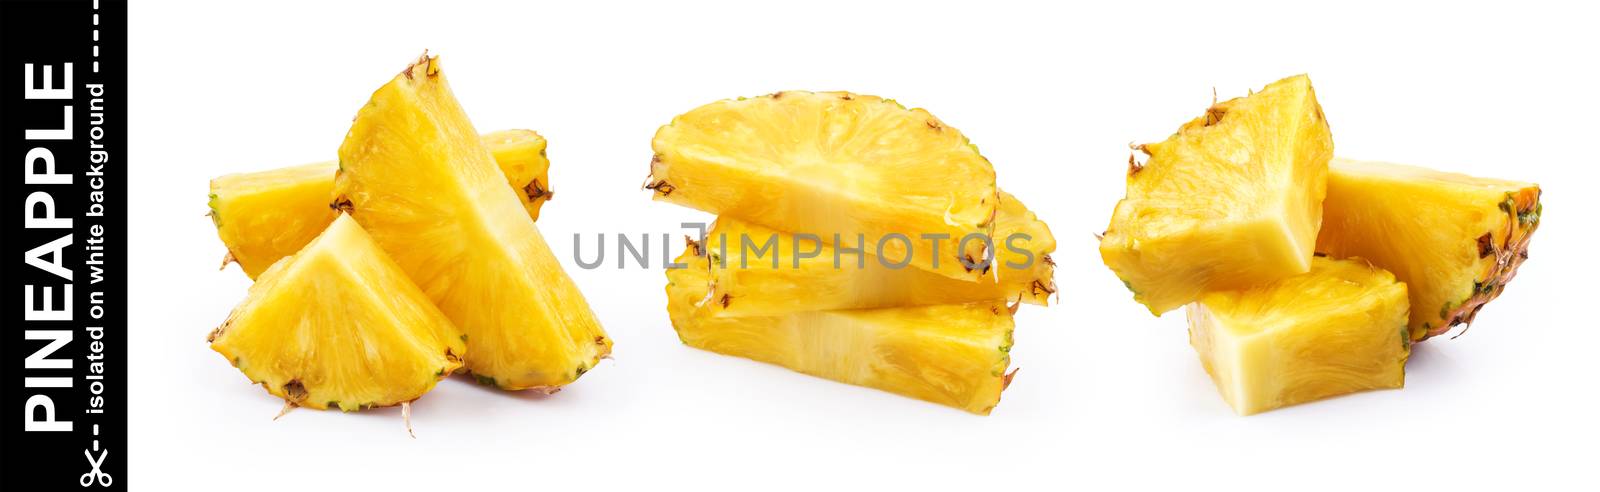 Pineapple slices isolated on white background by xamtiw